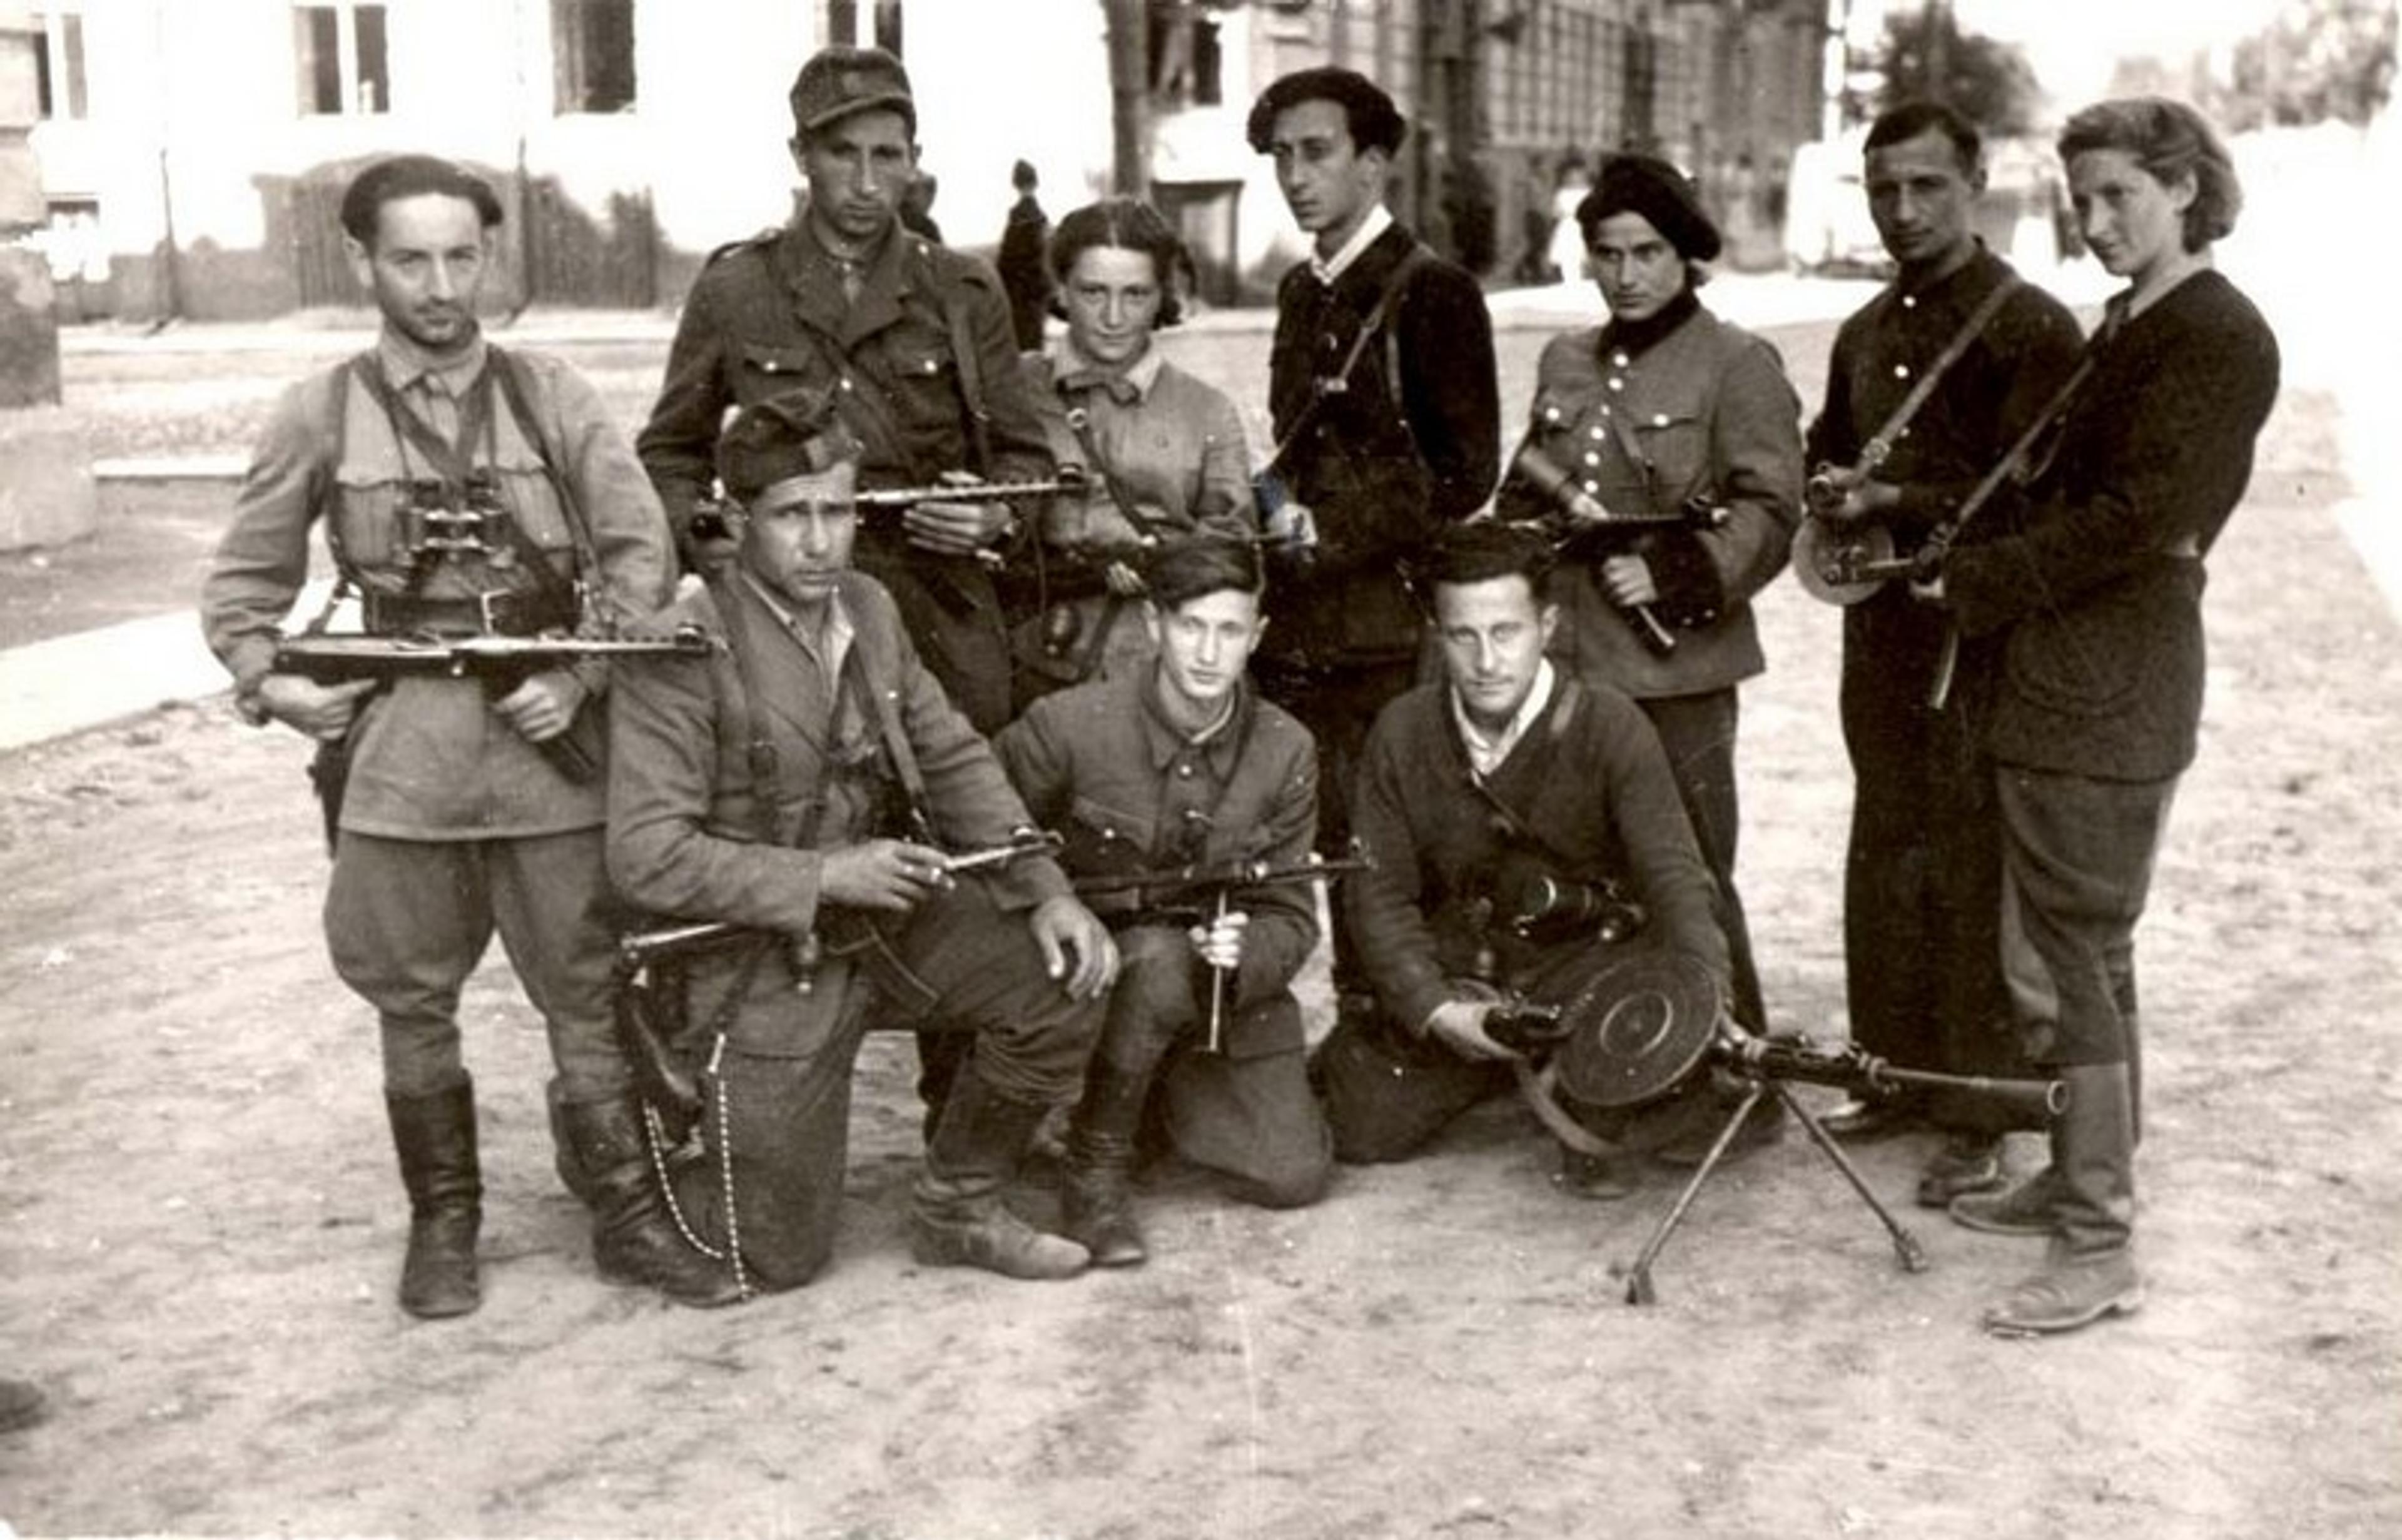 Group of nine armed individuals in military attire posing outdoors on a street during daytime, some crouching, others standing with weapons.